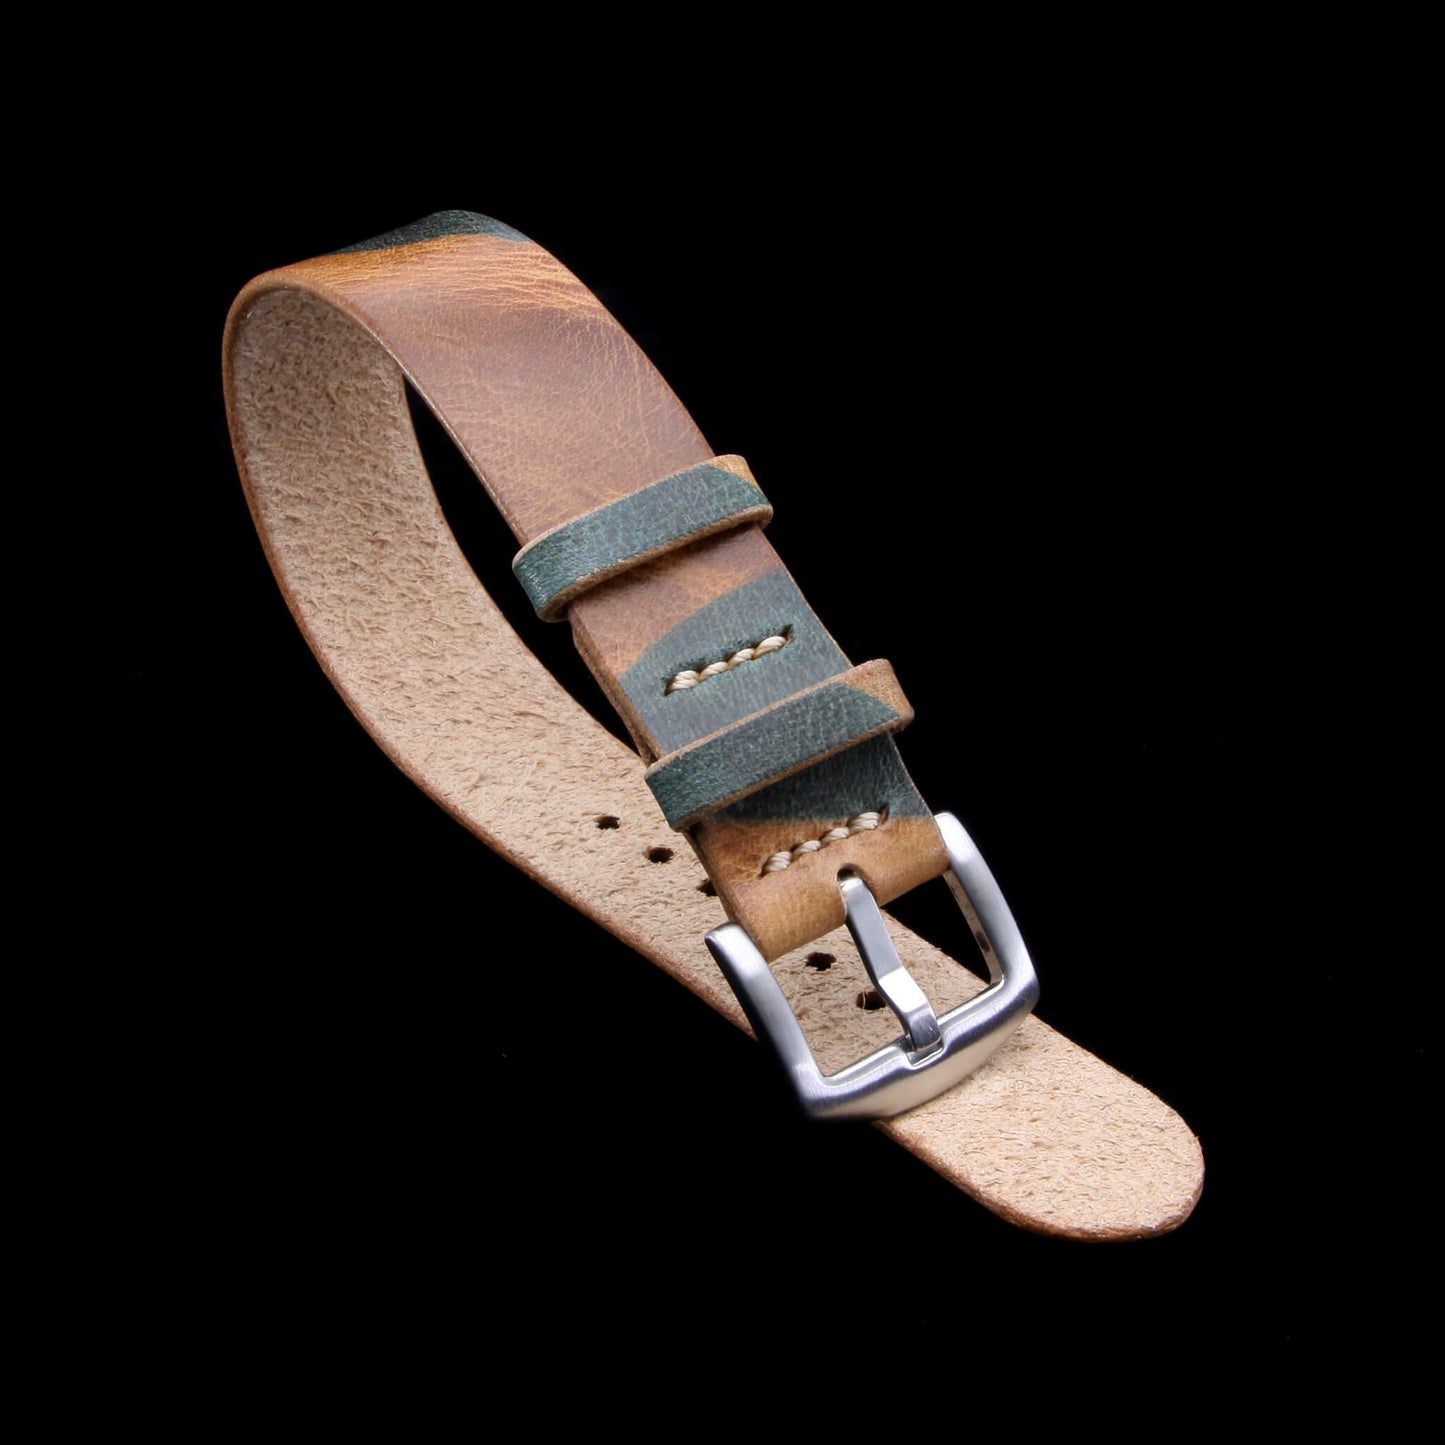 Single Pass Leather Watch Strap, 2-Keeper Military 101 | Full Grain Italian Vegetable-Tanned Leather | Cozy Handmade